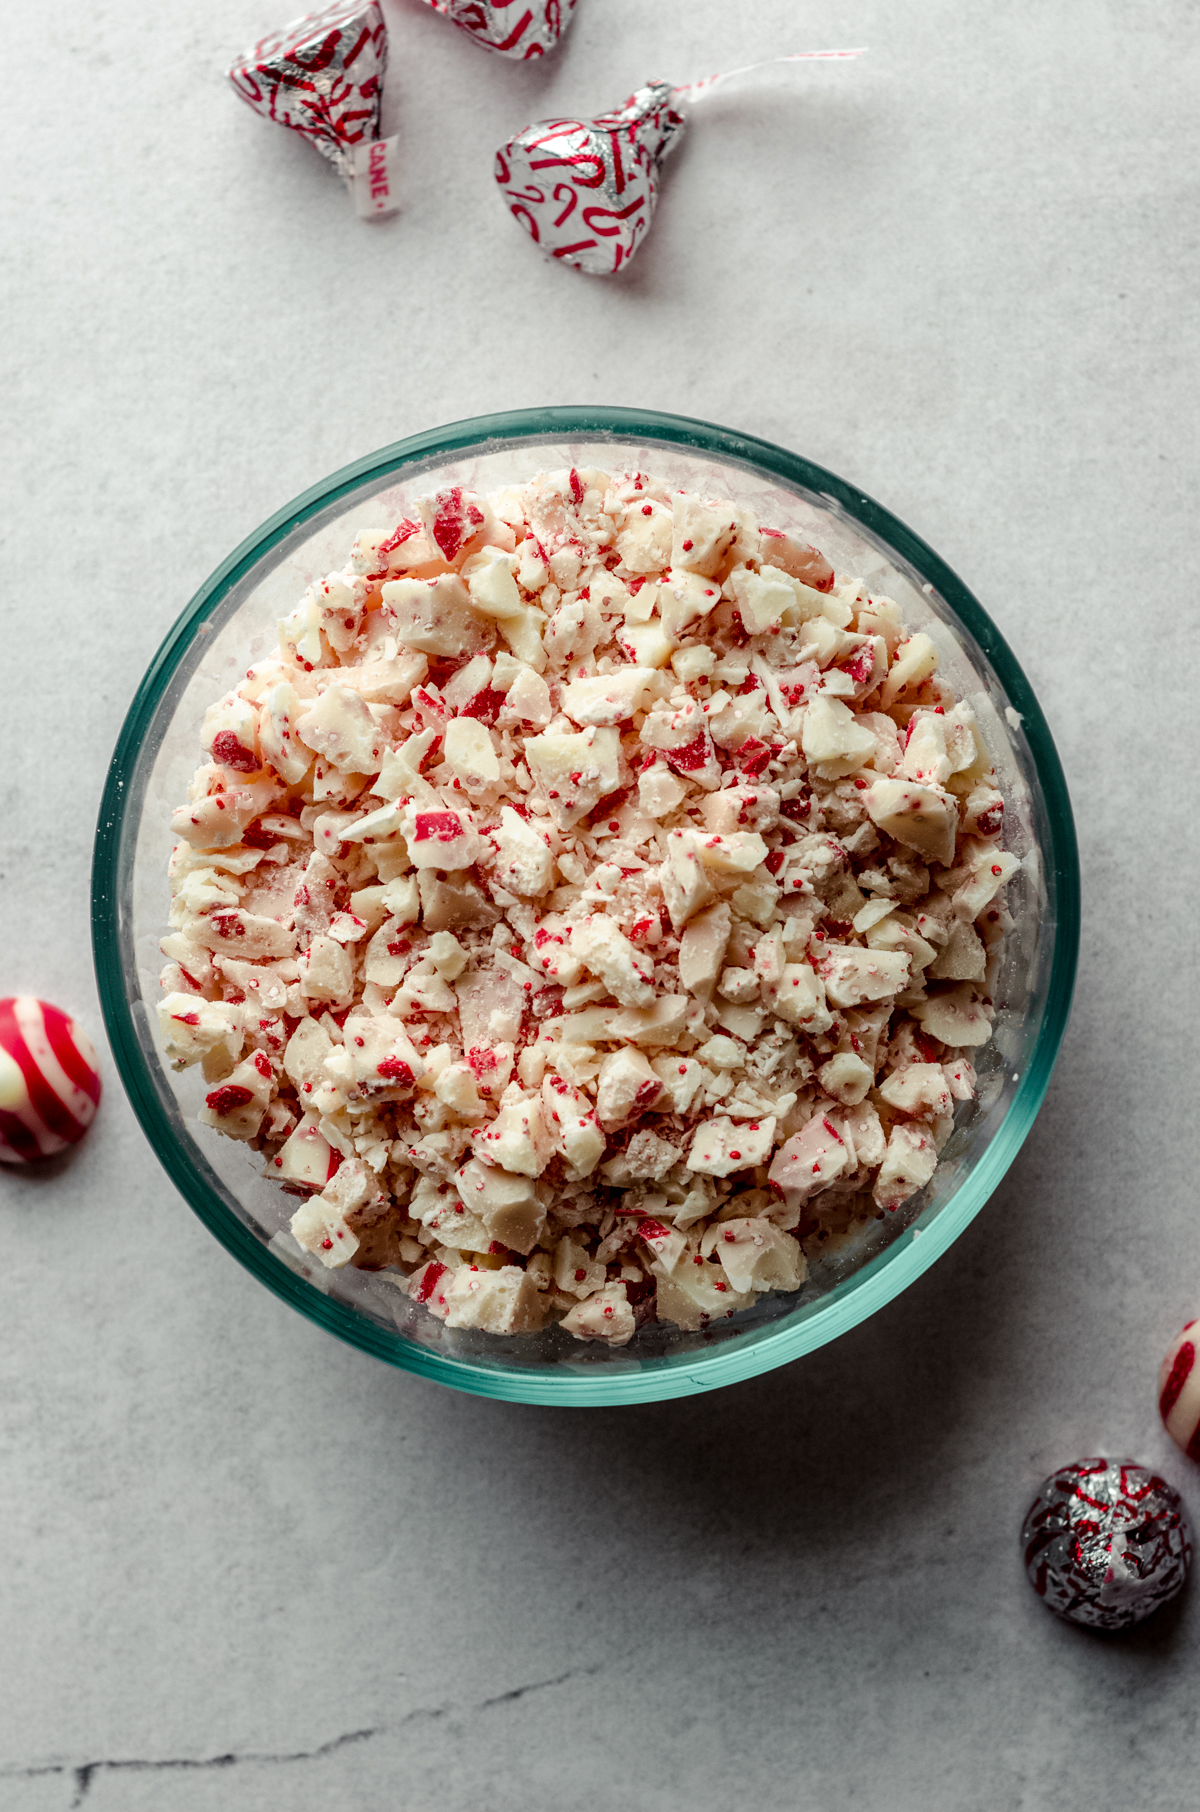 Aerial photo of a bowl of chopped candy cane Hershey's Kisses.